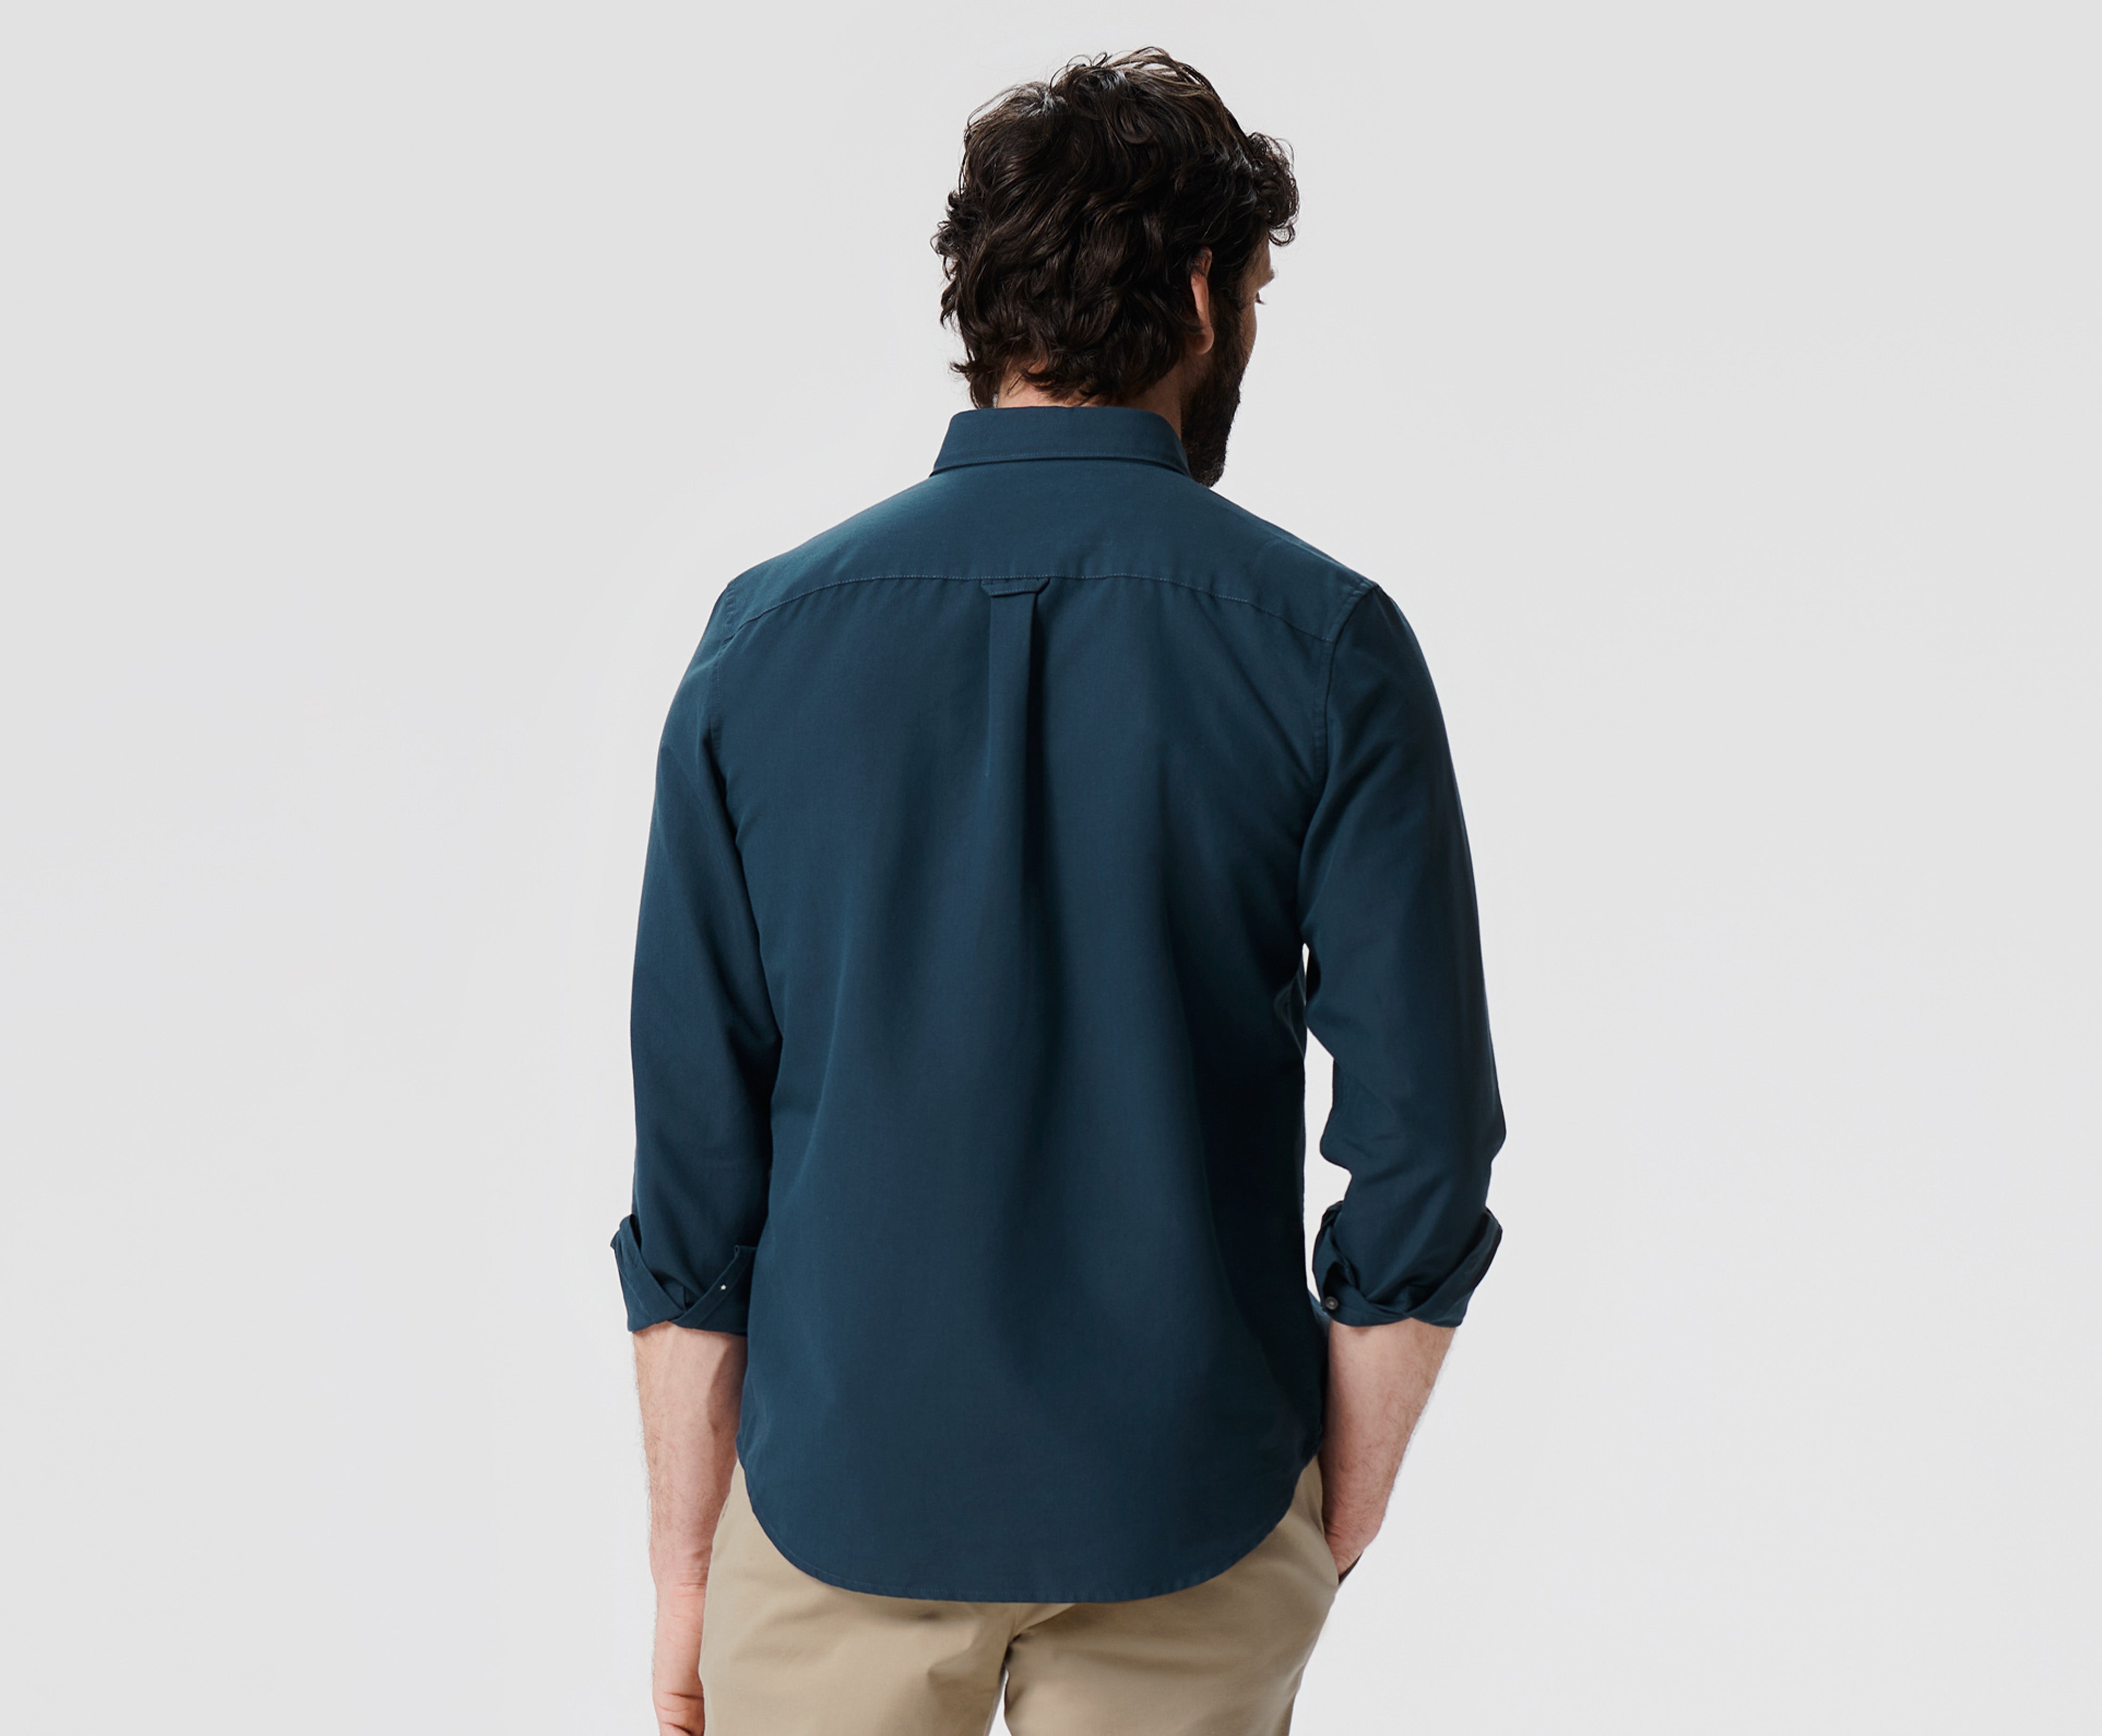 REVIEW: the Mack Weldon 37.5 Oxford Shirt Kept Me Cool and Dry